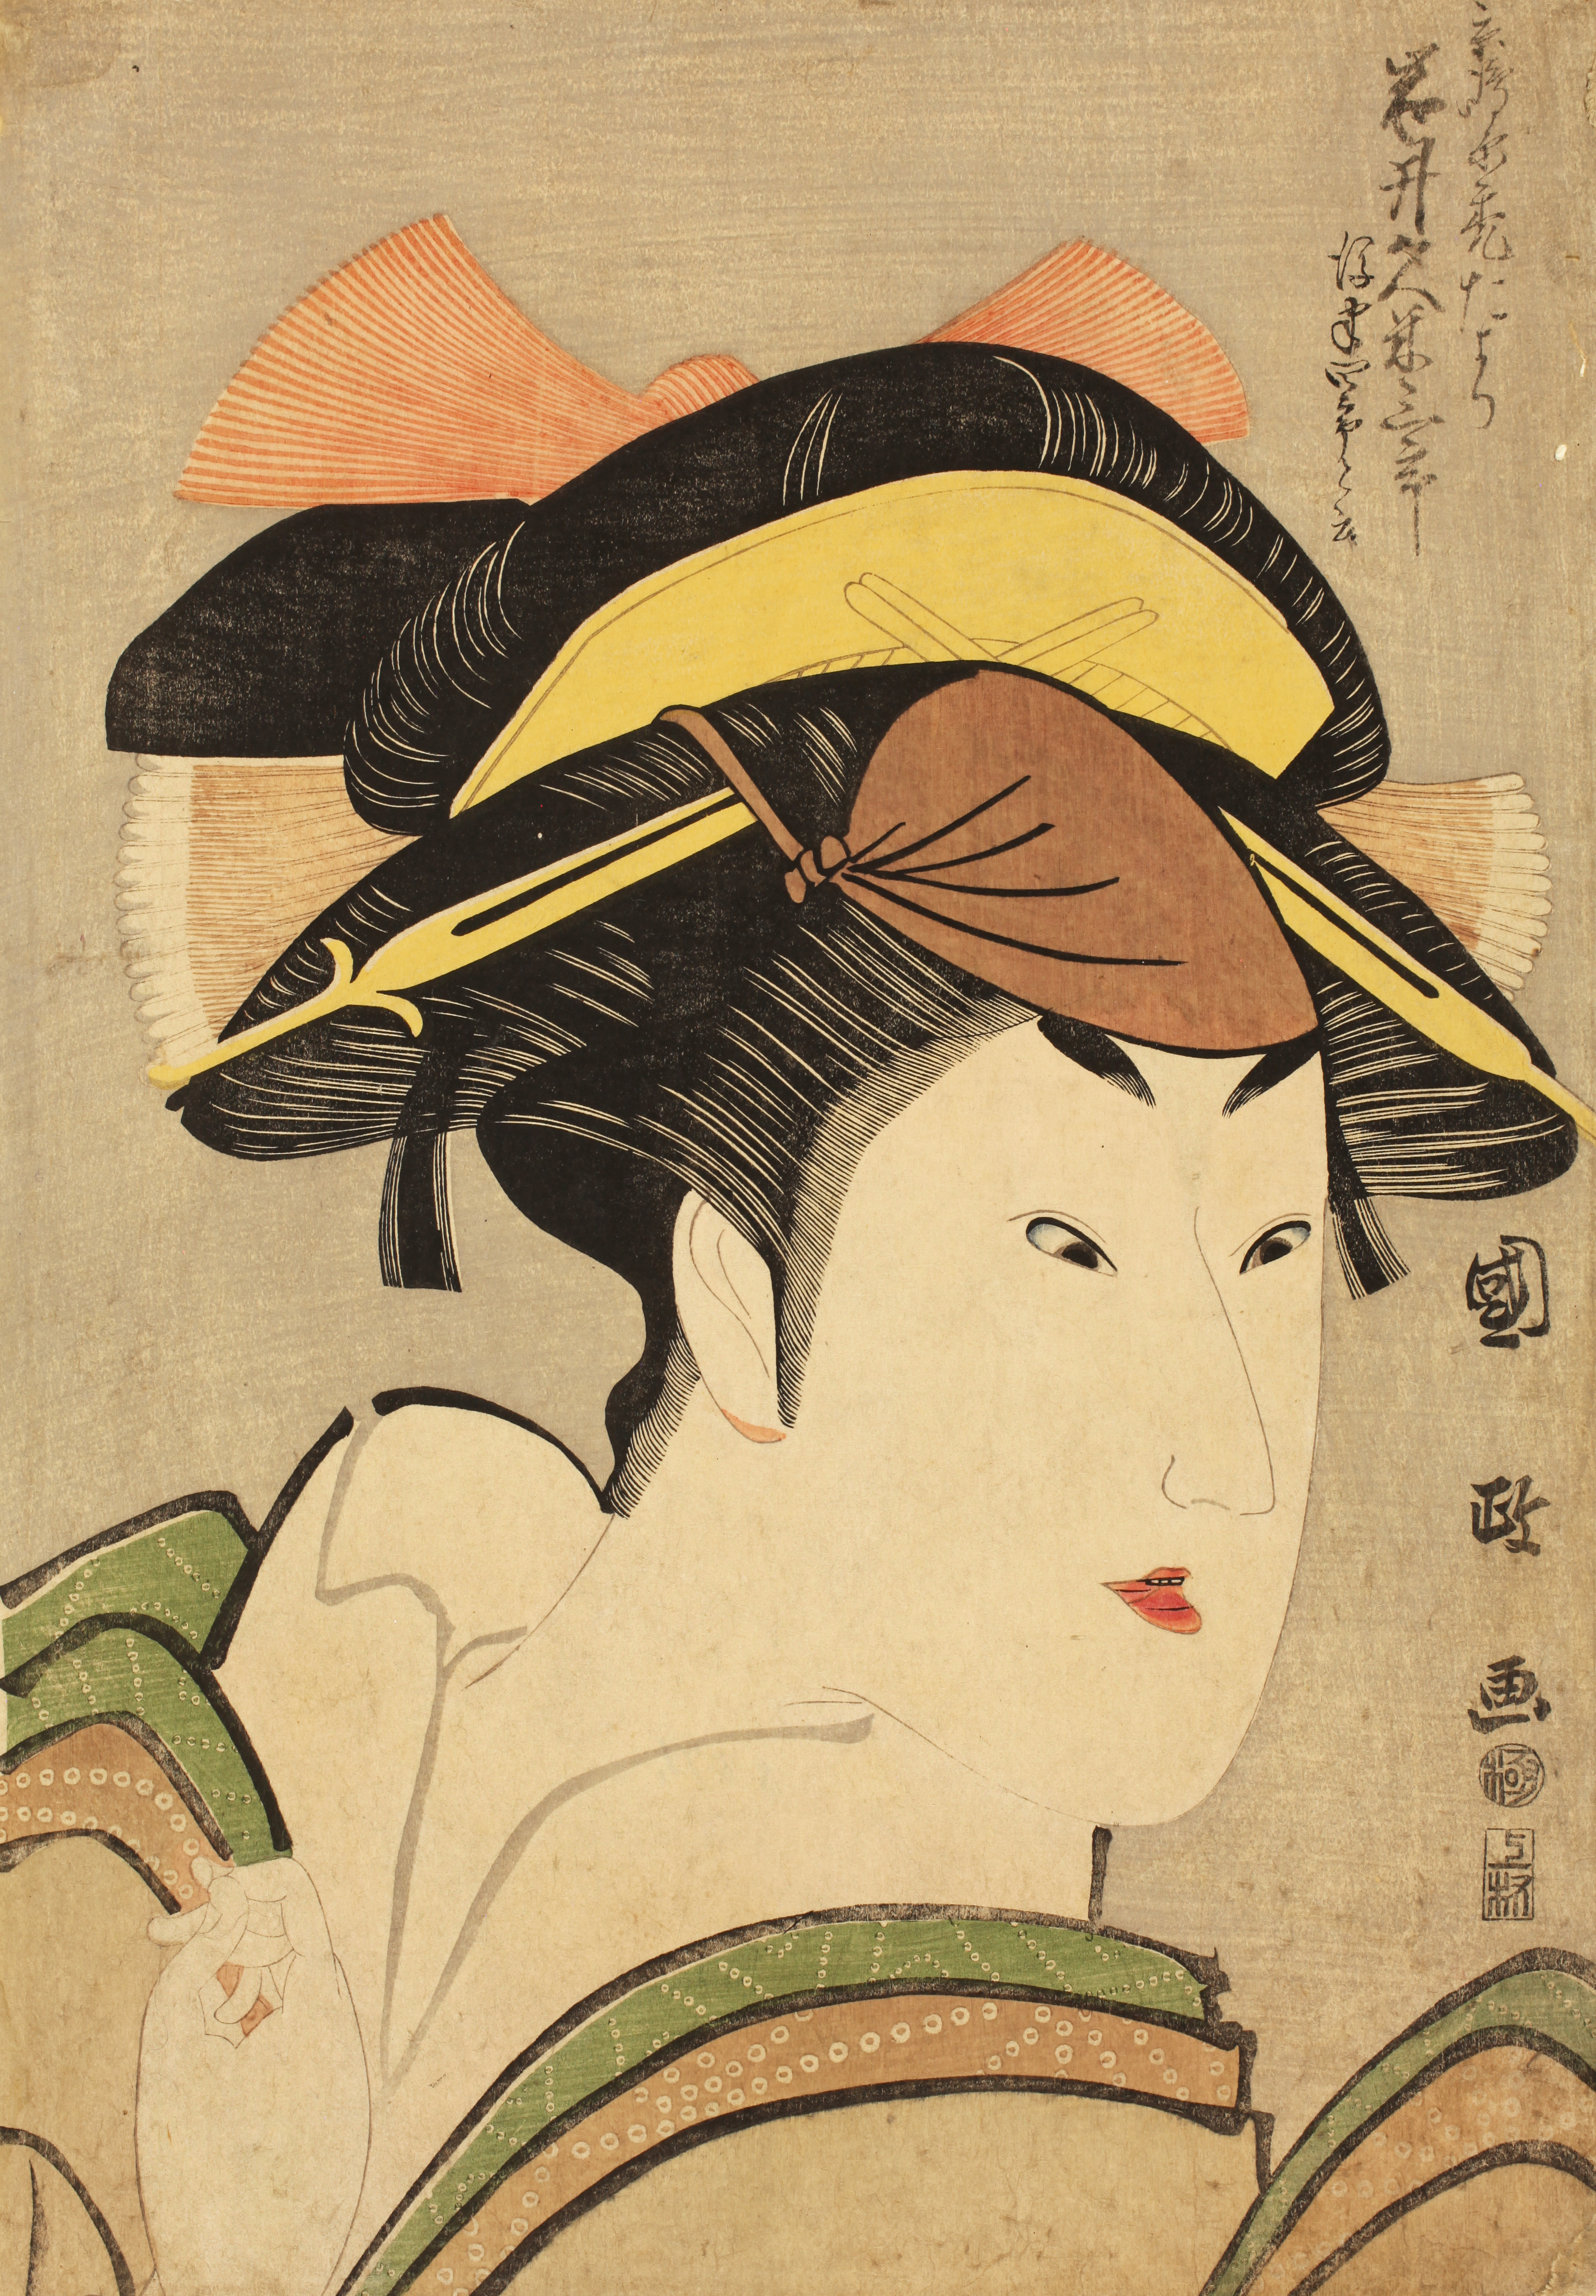 - A 1796 portrait by Utagawa Kunimasa depicts the actor Iwai Kumesaburo¯ performing as a kamuro, a little girl attendant to a courtesan, in training to become a courtesan herself. Allen Memorial Art Museum, Oberlin College